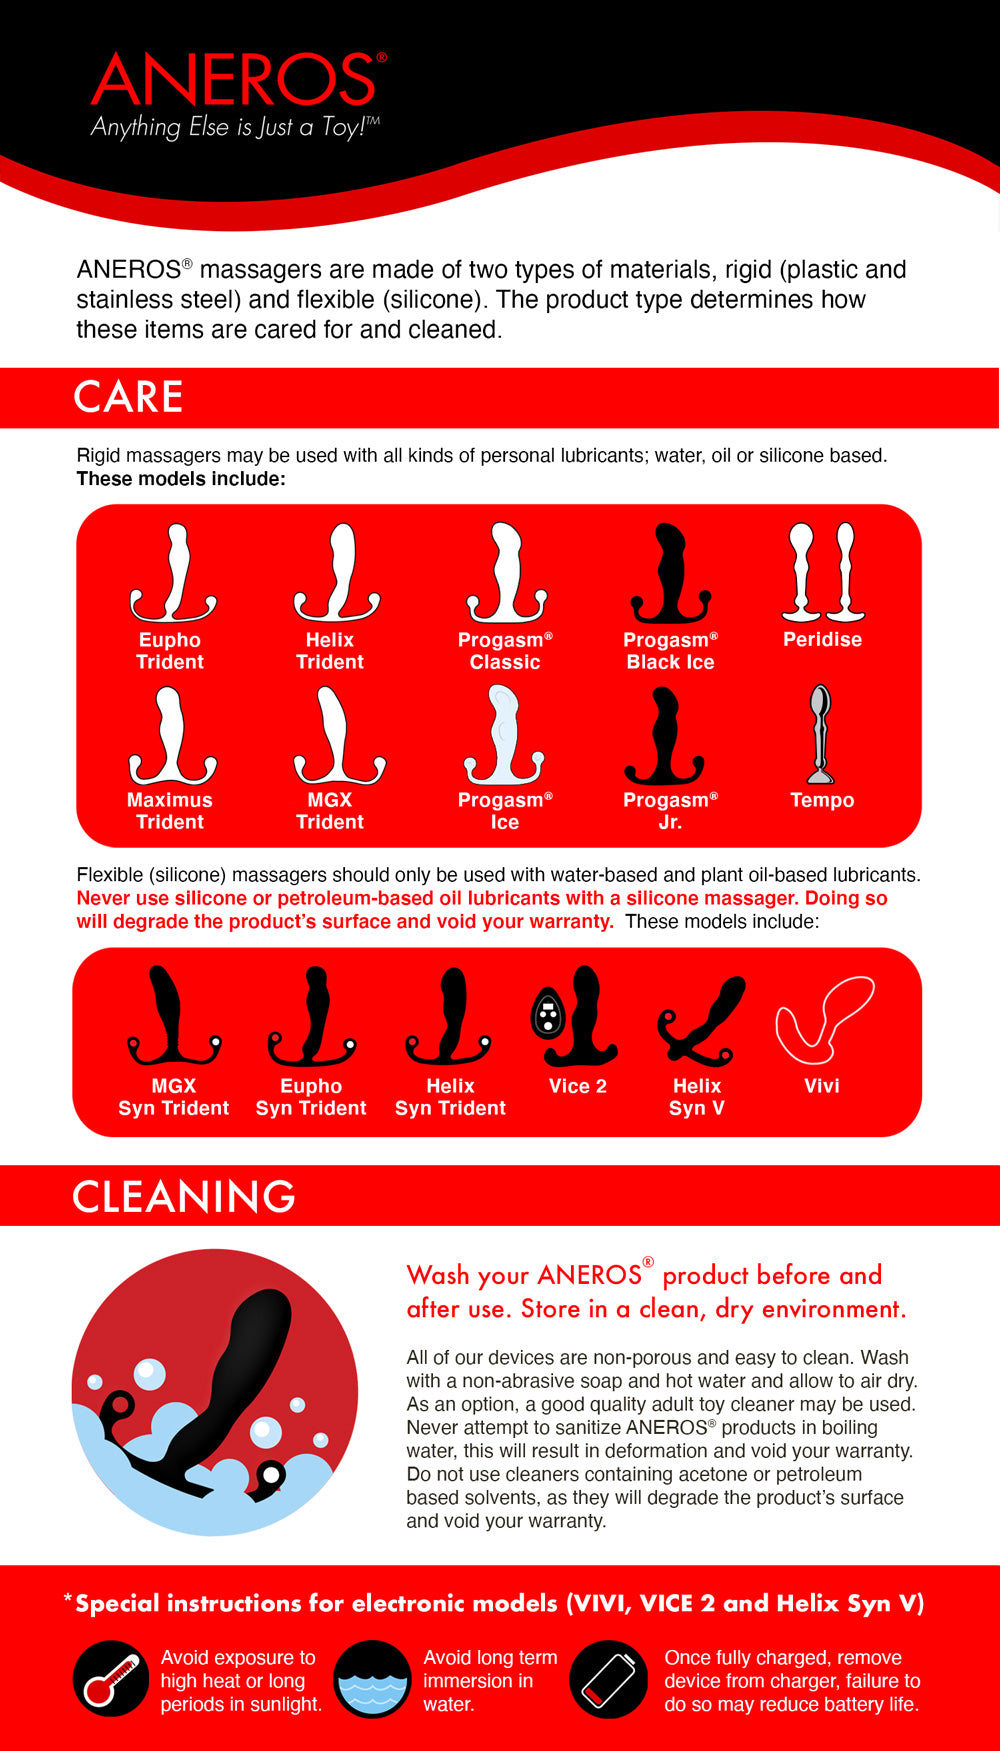 The care and cleaning instructions for Aneros toys.